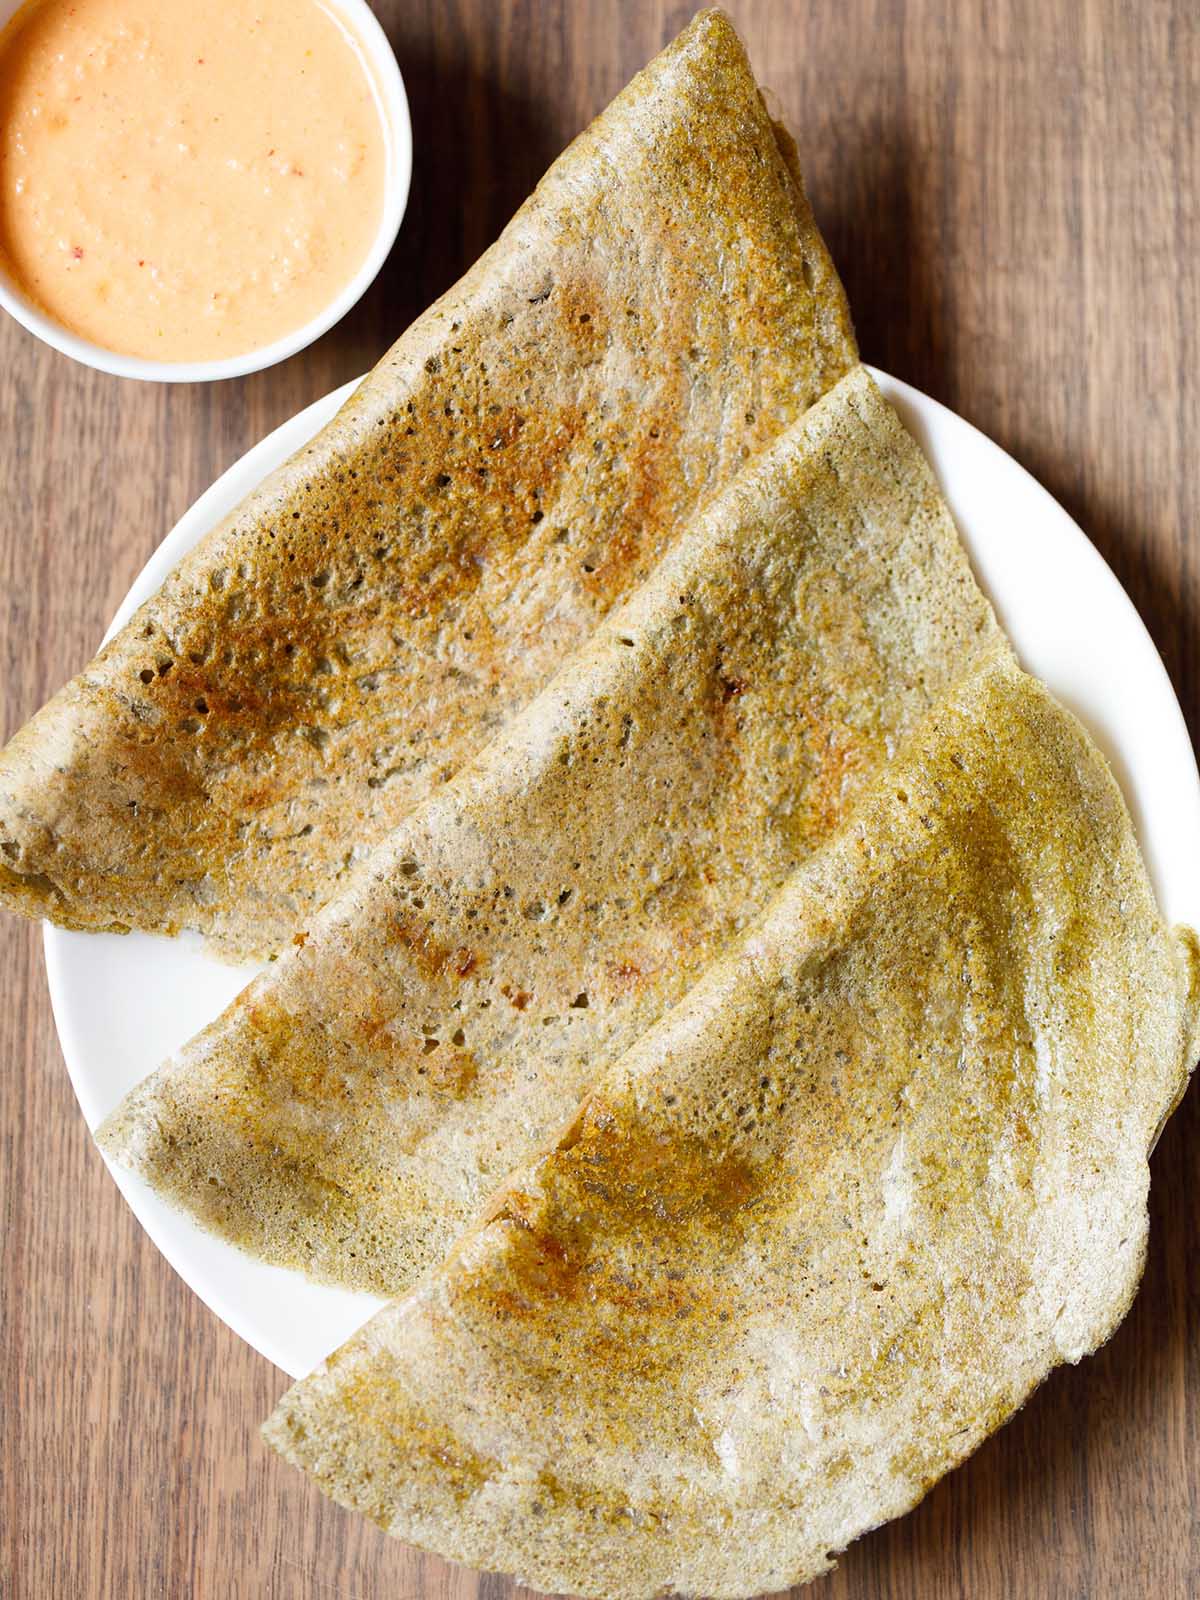 three pesarattu or moong dal dosa folded and kept on a white plate with a orange colored coconut chutney in a side bowl